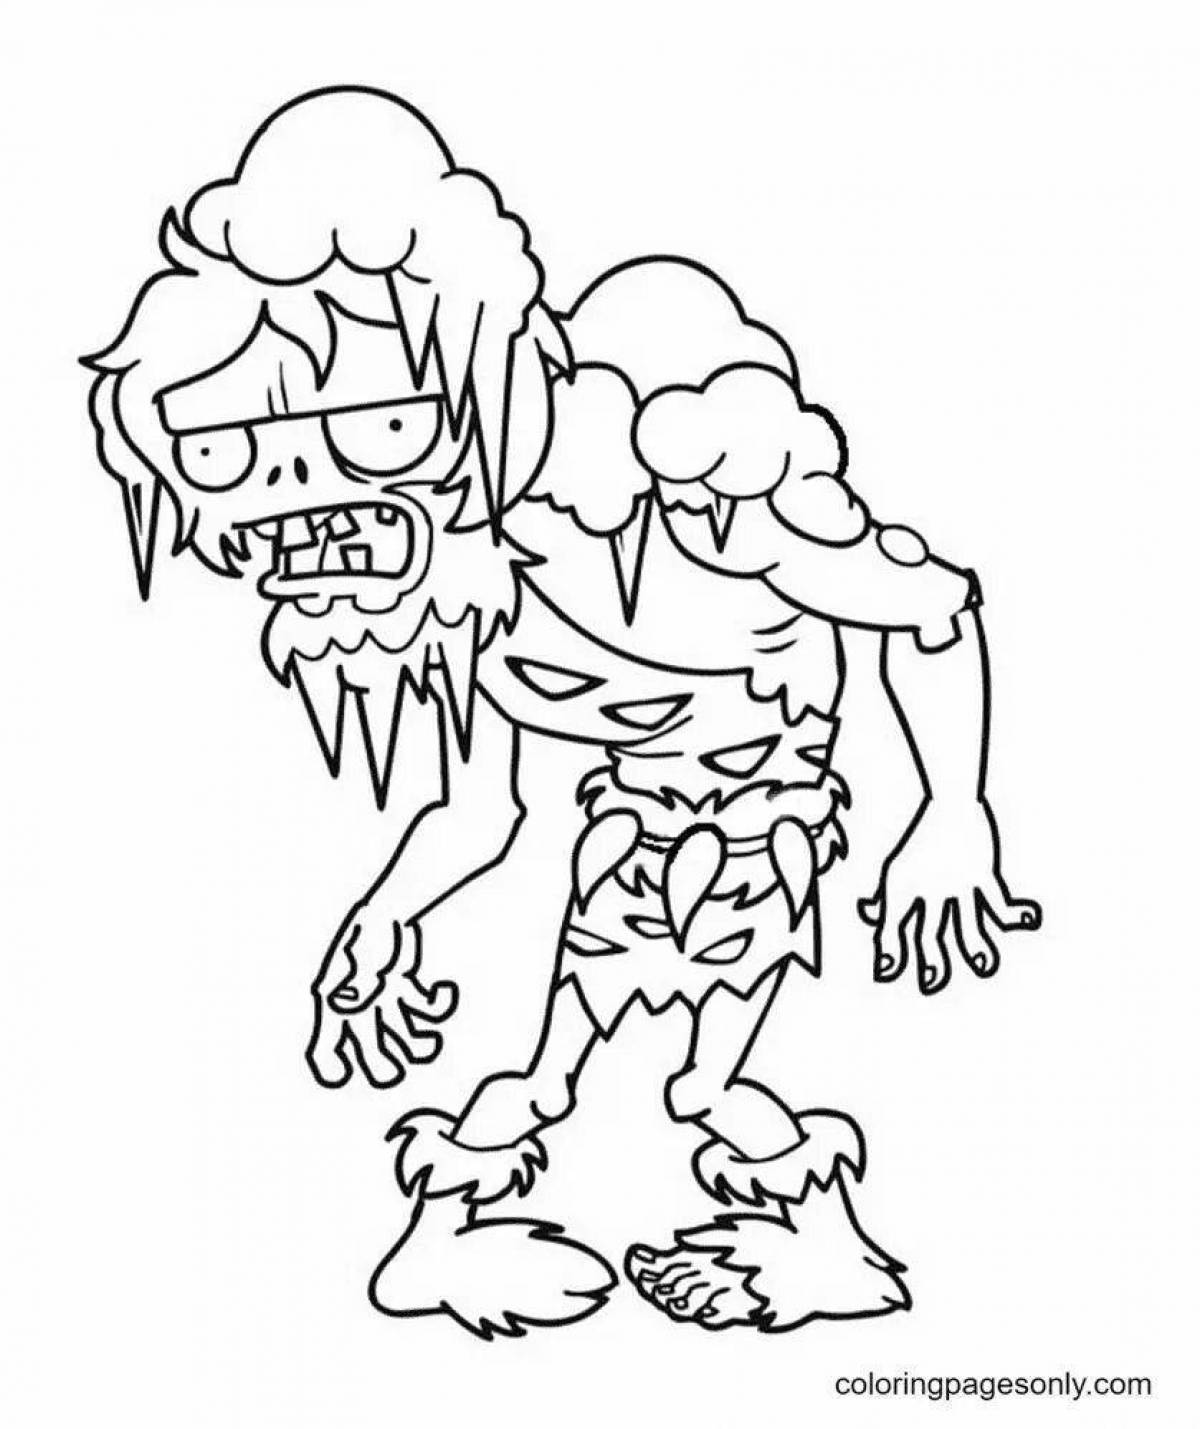 Coloring book magical zombies vs plants 3